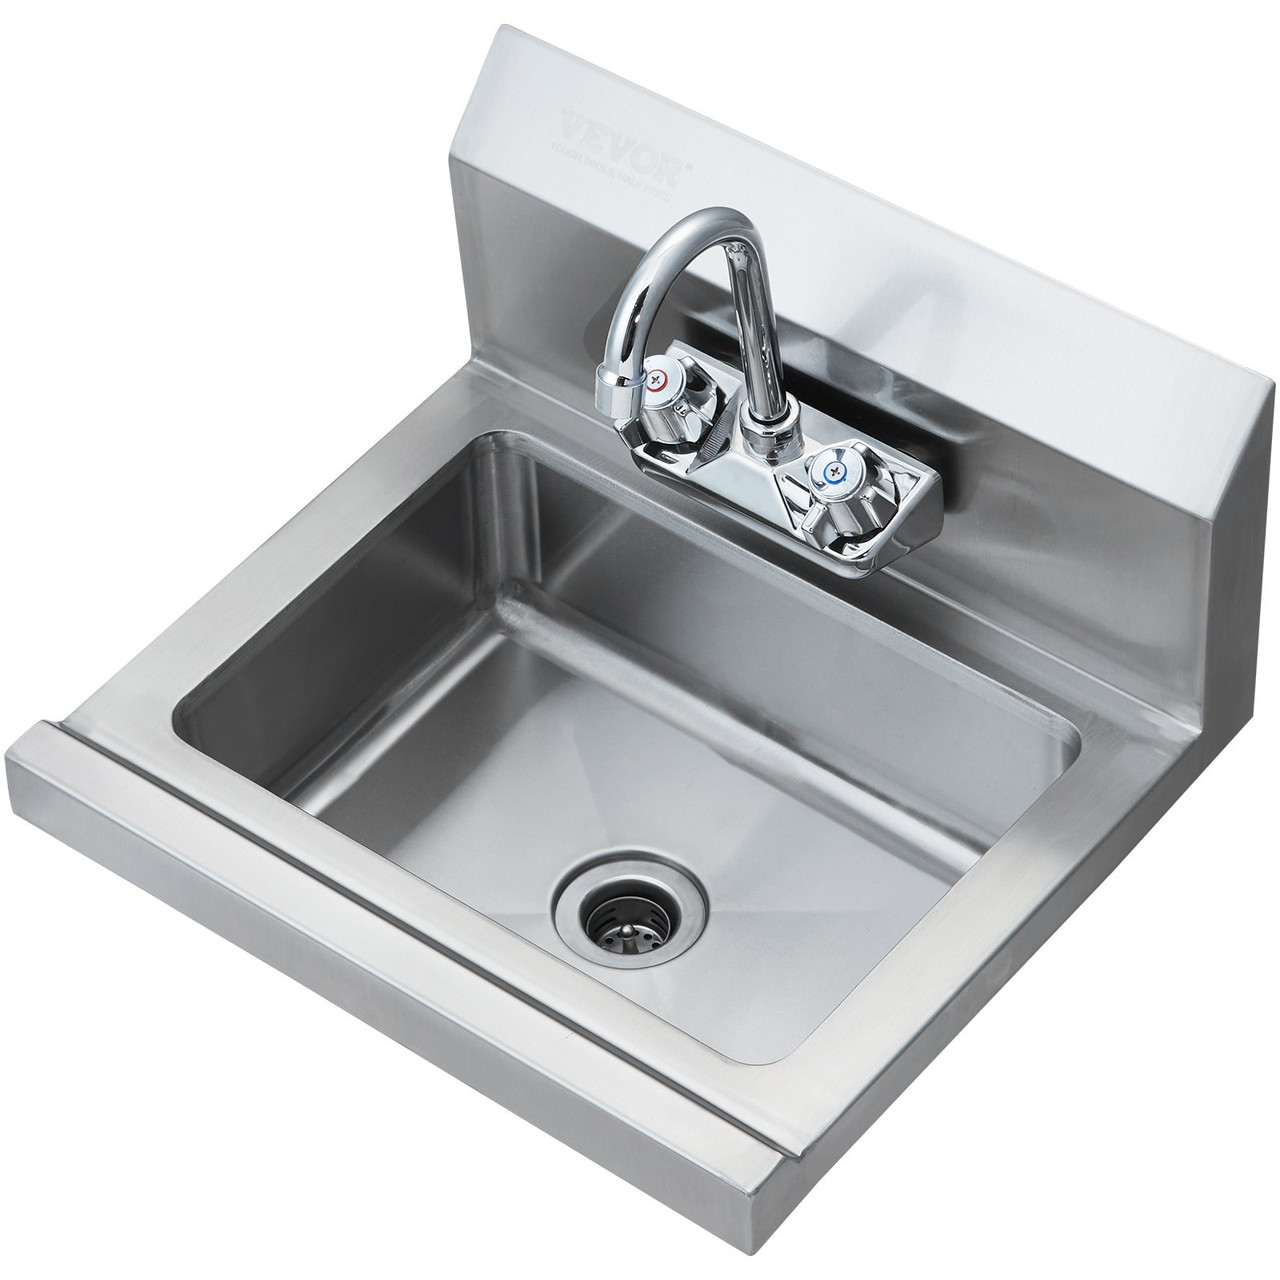 VEVOR Commercial Hand Sink with Faucet, NSF Stainless Steel Sink for Washing, Small Hand Washing Sink, Wall Mount Hand Basin, Utility Sink for Restaurant, Kitchen, Bar, Garage and Home, 17 x 12.8 inch